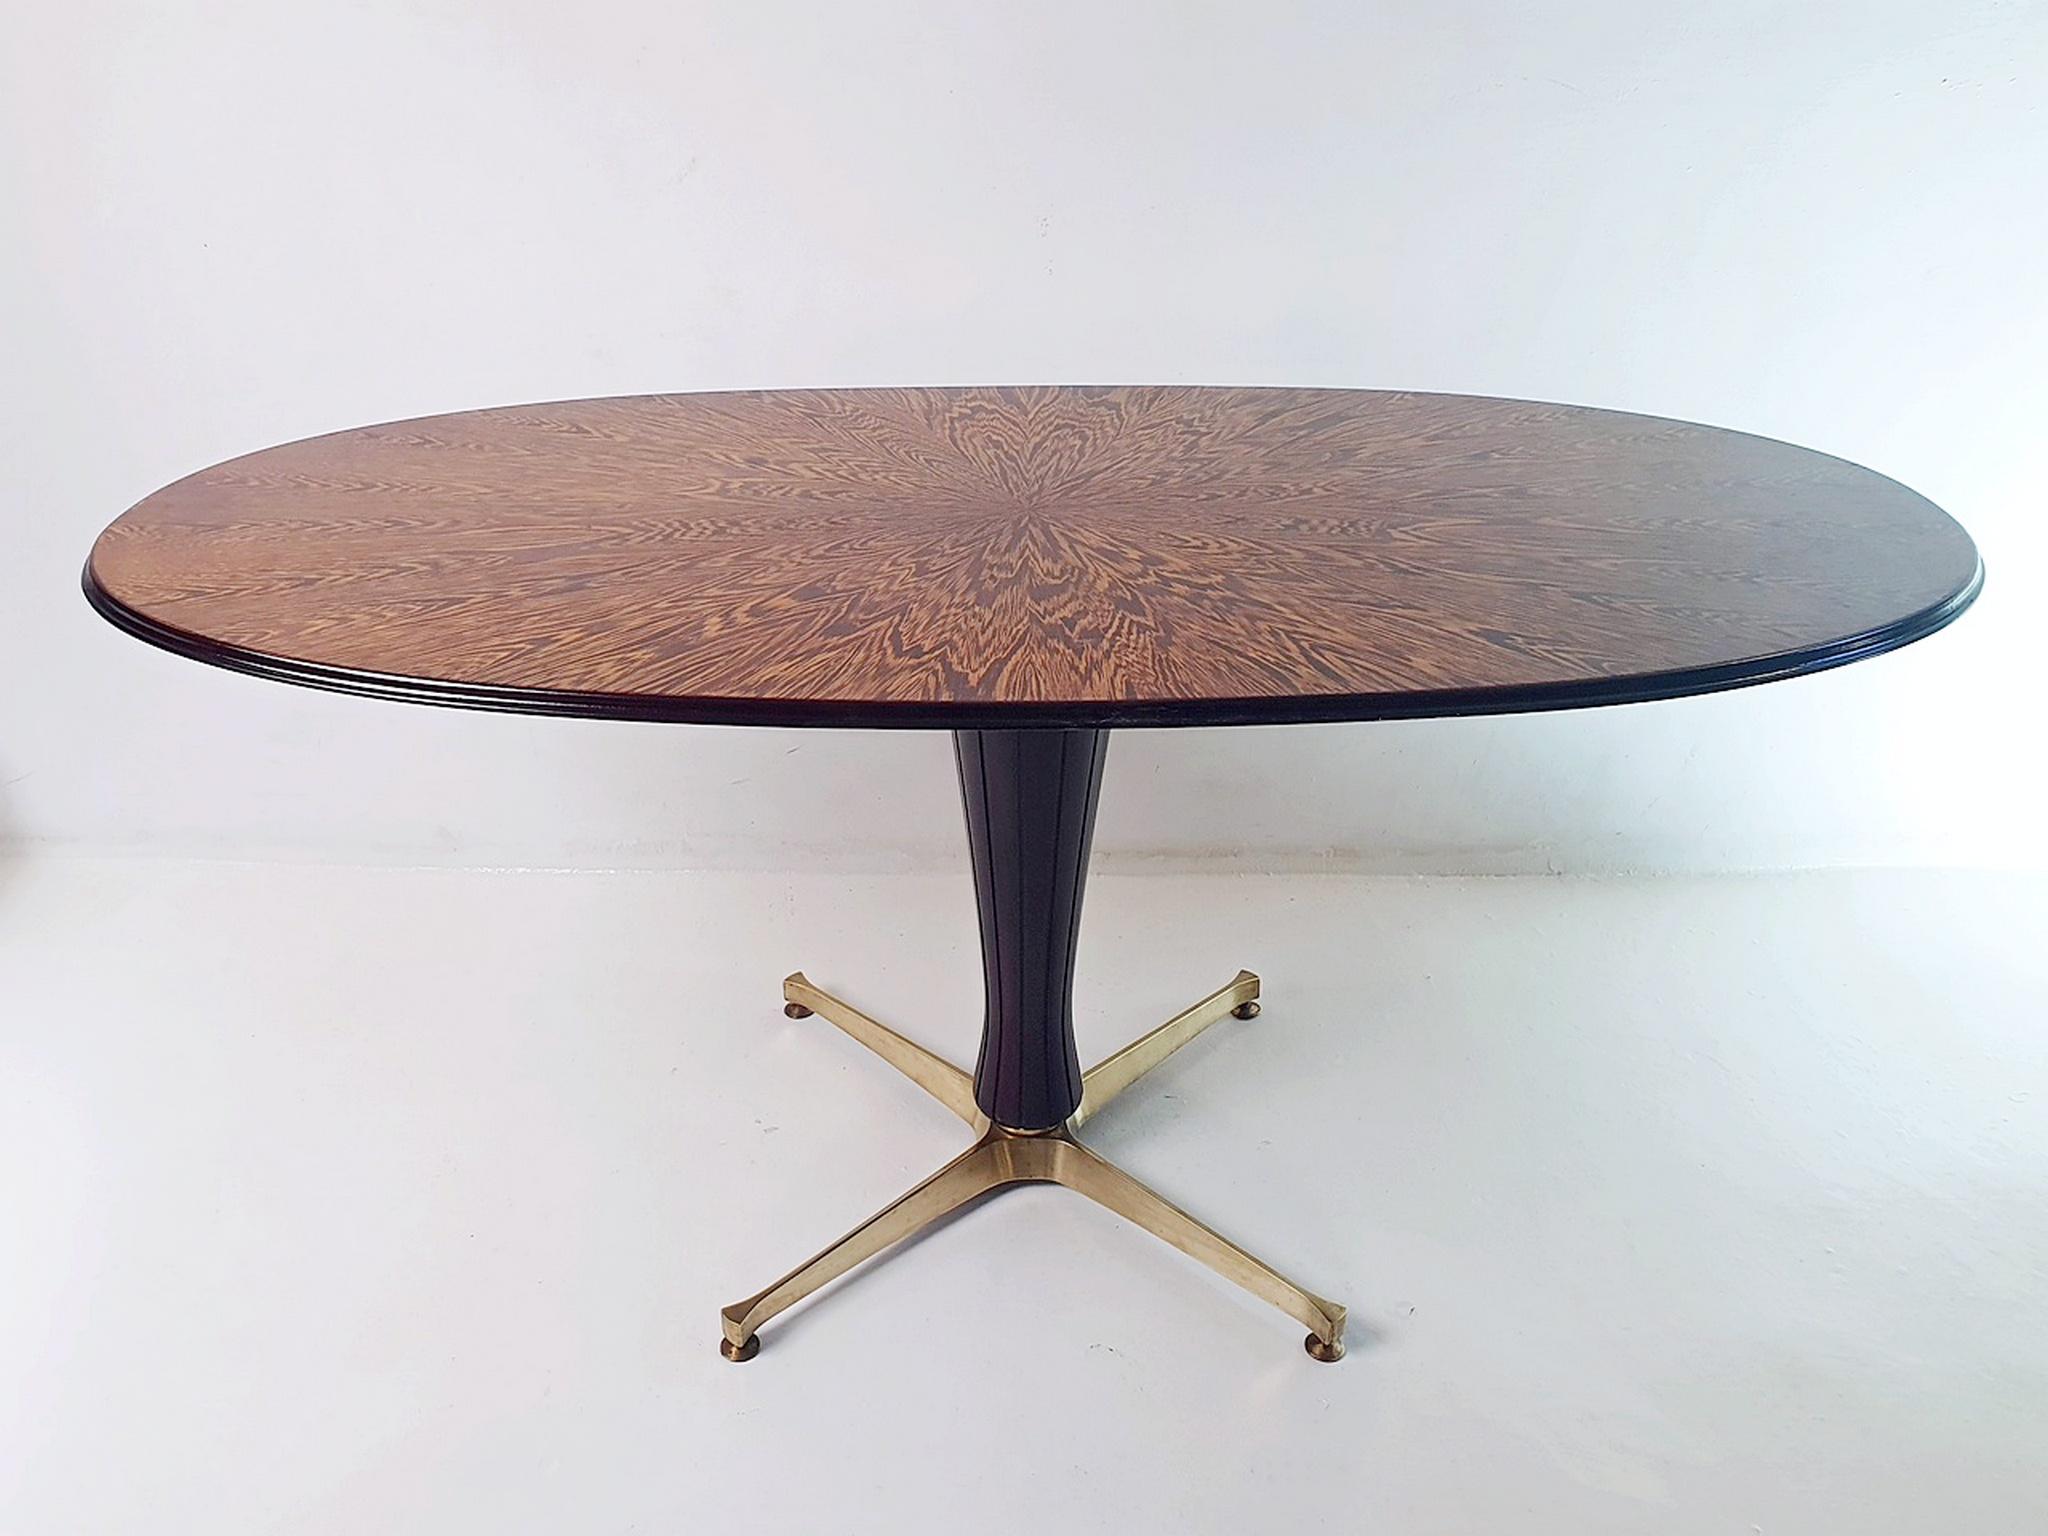 Midcentury oval dining table in mahogany. The tabletop rests on a center pillar in solid brass feet. The top which is unique in its composition has been restored and is in perfect condition. The table will sit between 6 persons comfortably and a